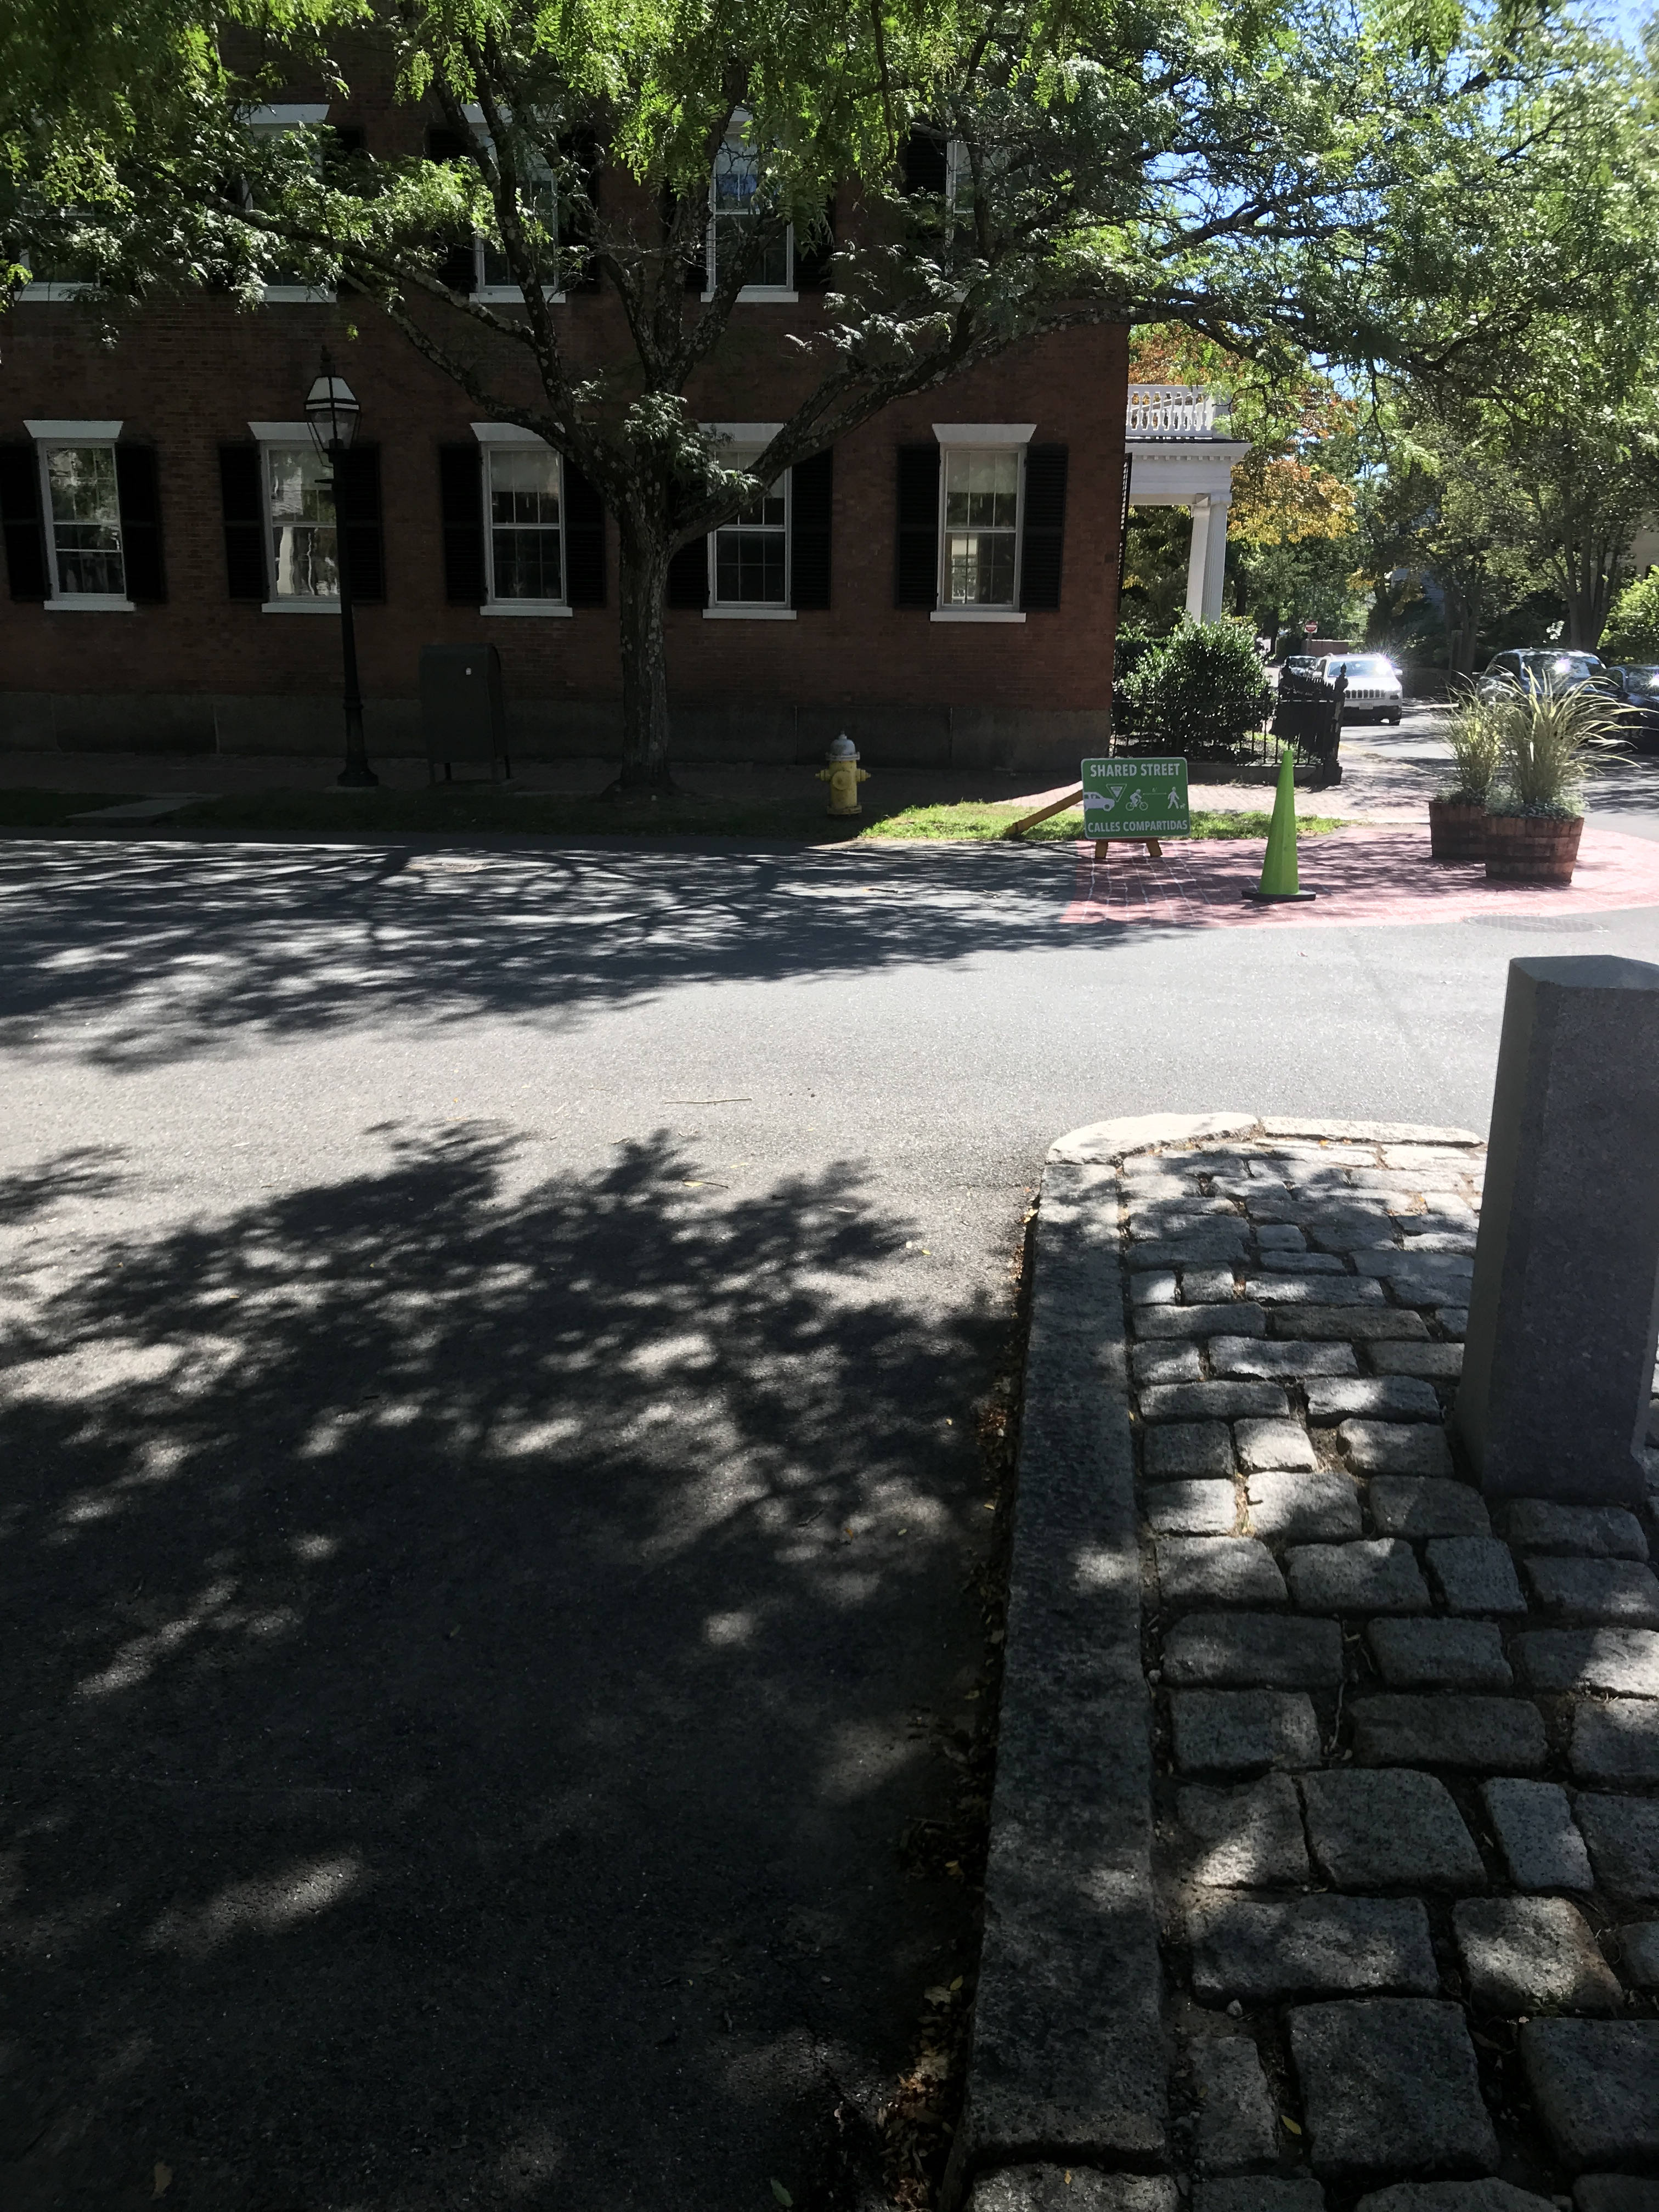 View of 'Shared Street' sign on a shaded street. Granite hitching posts in foreground.